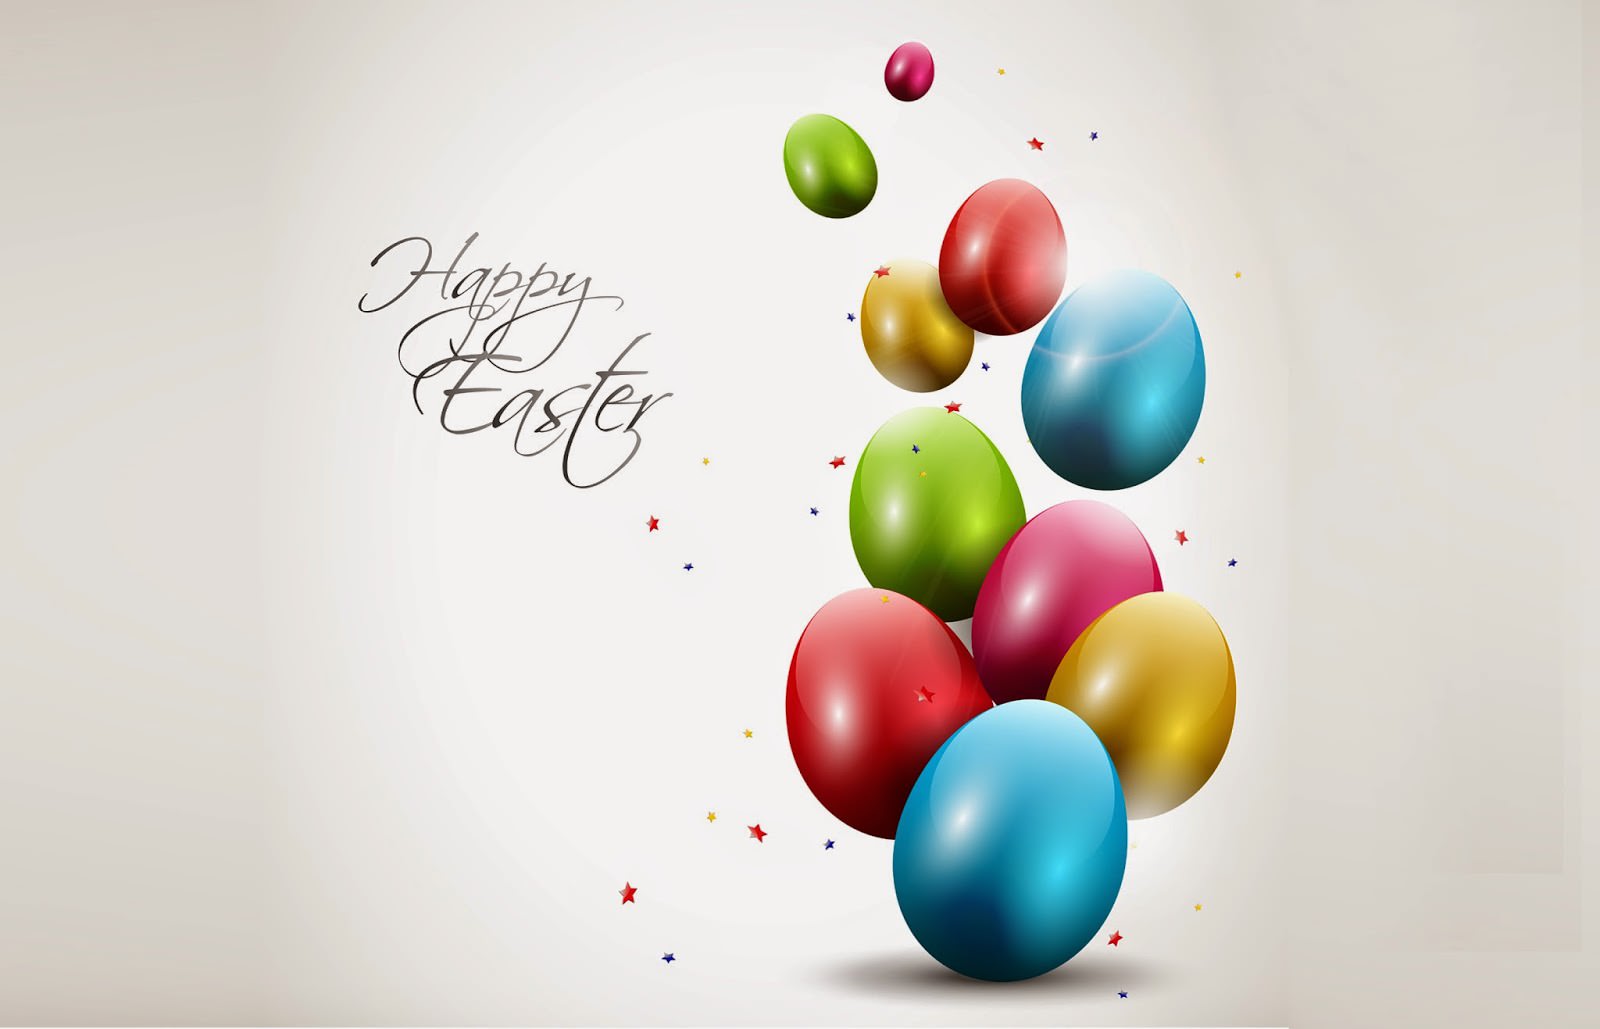 FREE 20+ Best Happy Easter Backgrounds in PSD | AI